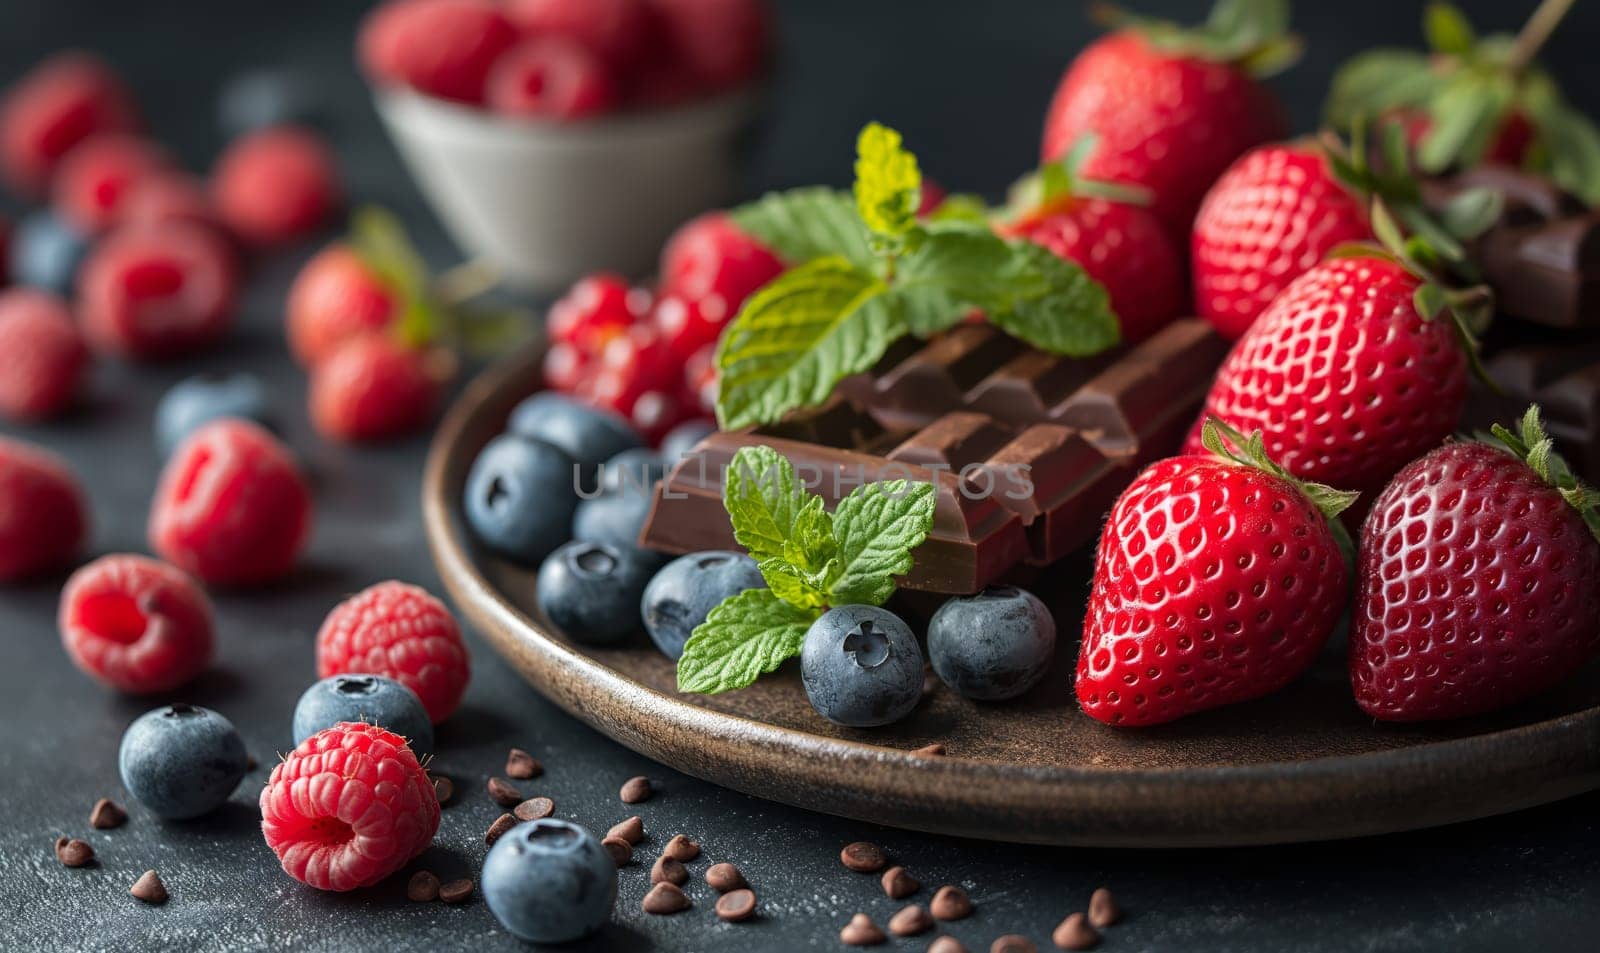 Chocolate and fresh berries on the table. by Fischeron